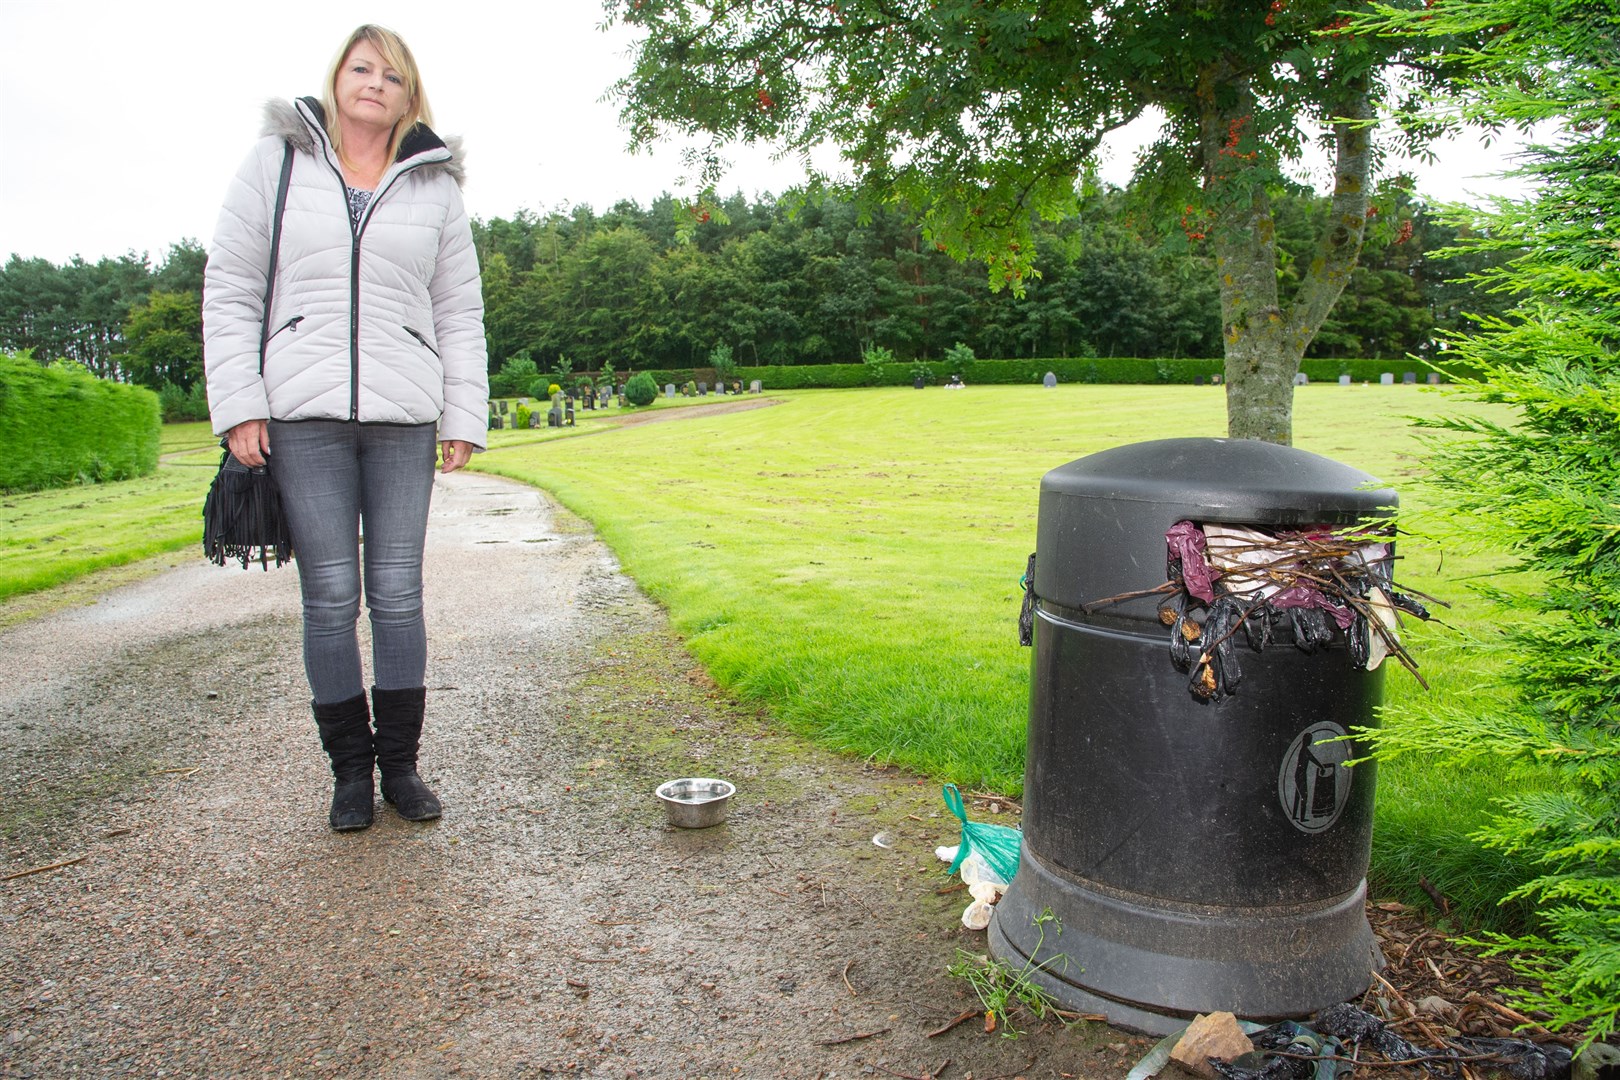 Julie Simpson - whose father’s grave is at Lhanbryde Cemetary - is unhappy with the state of the cemetary, including the overflowing bin that is full of dog waste and is rarely emptied...Picture: Daniel Forsyth. Image No.044620.